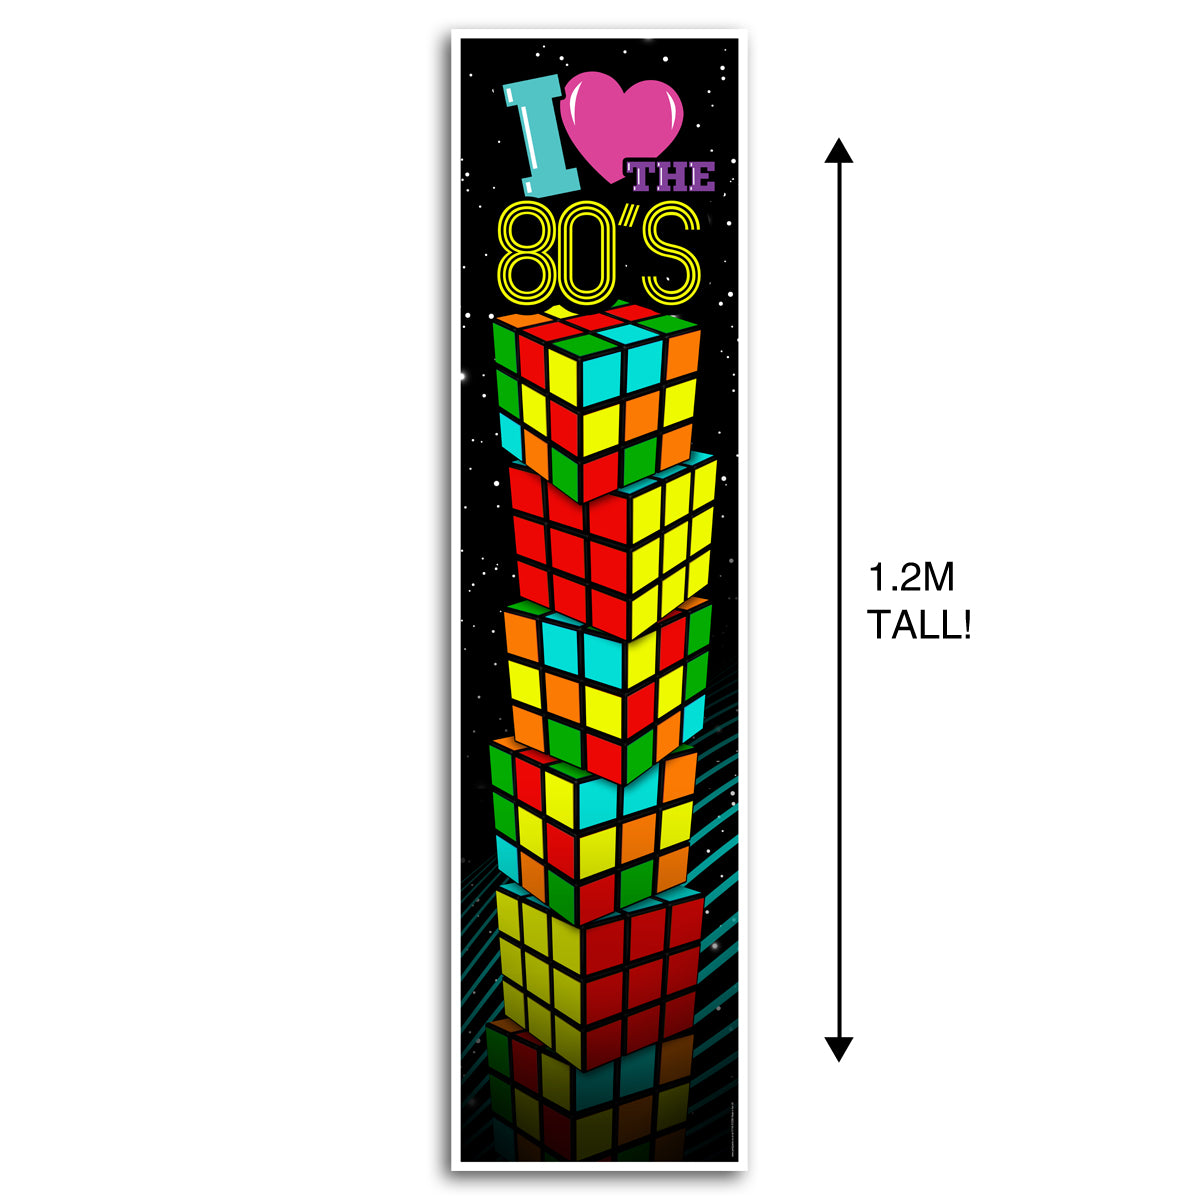 1980's I Love the 80's Puzzle Cube Portrait Wall & Door Banner Decoration - 1.2m